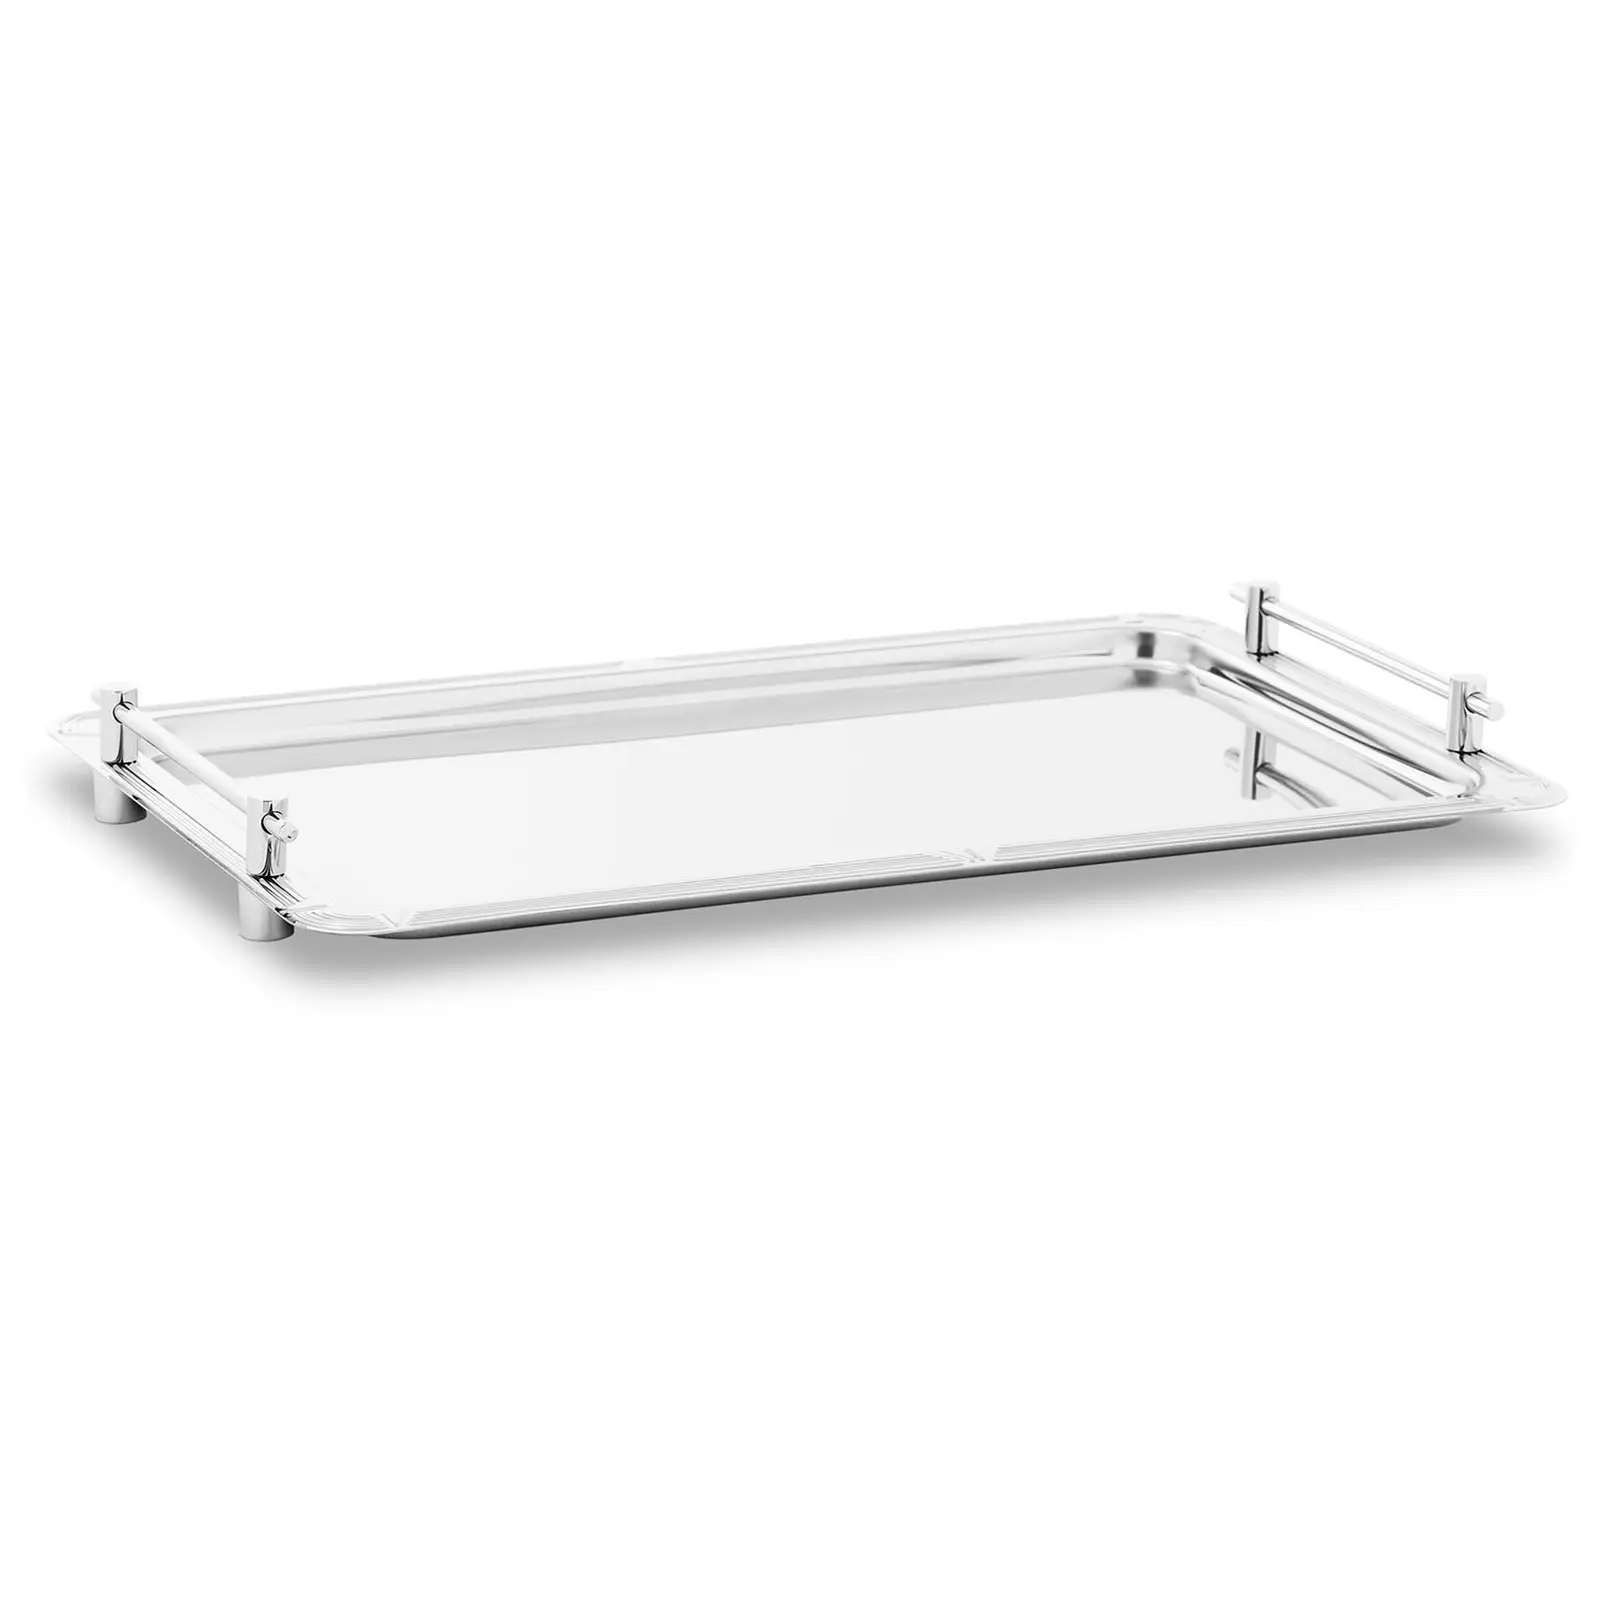 Bandeja - GN 1/1 - acero inoxidable - Royal Catering - 530 x 325 x 40 mm